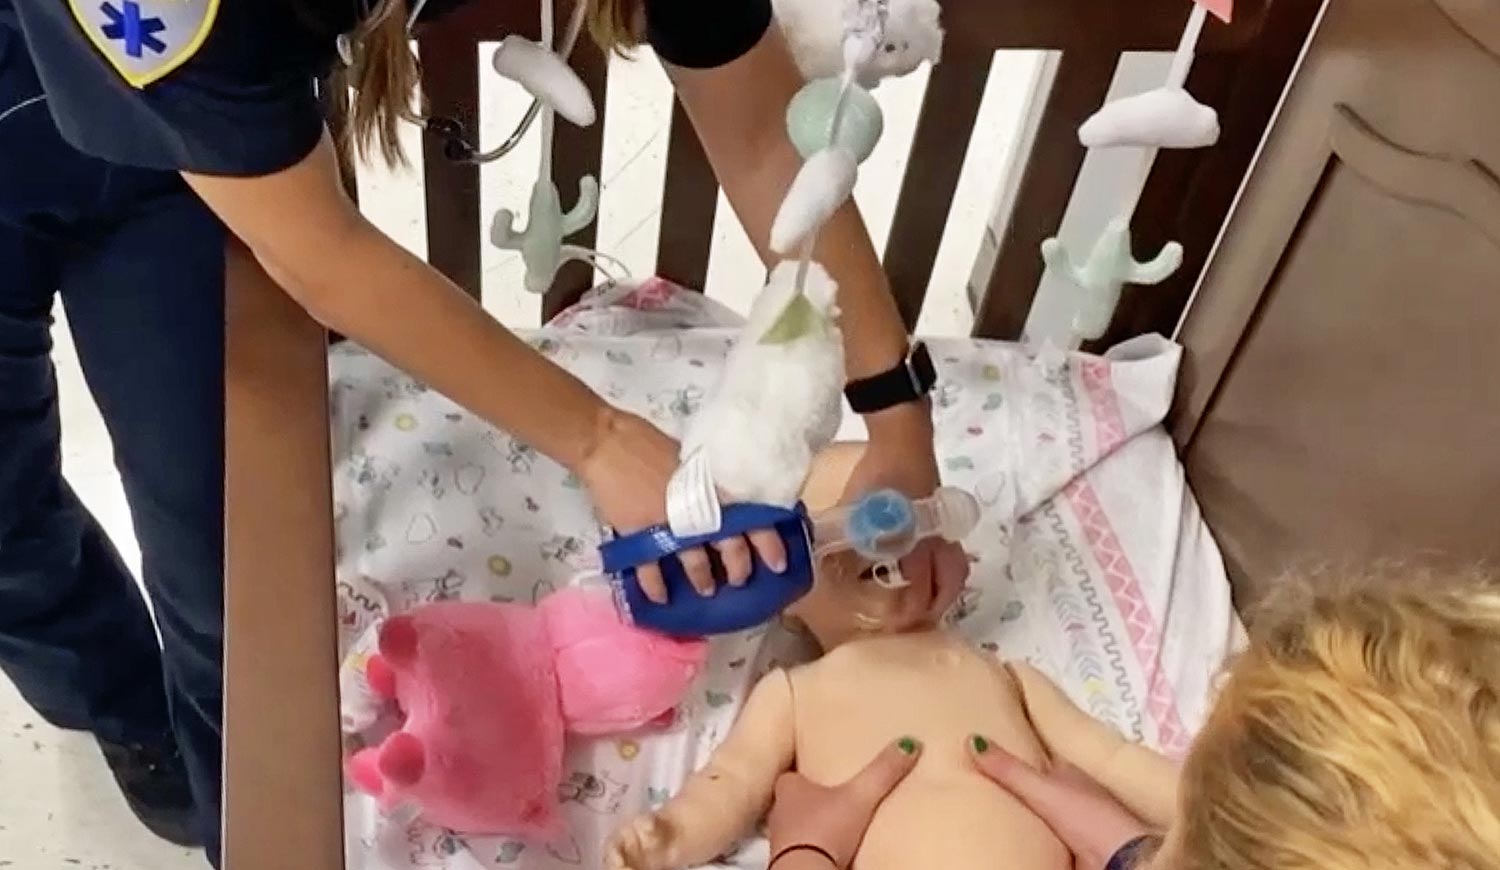 EMT students use a ventilator mask and chest compression to perform CPR on infant mannequin in crib at Wake Tech's EMS Simulation Suite.